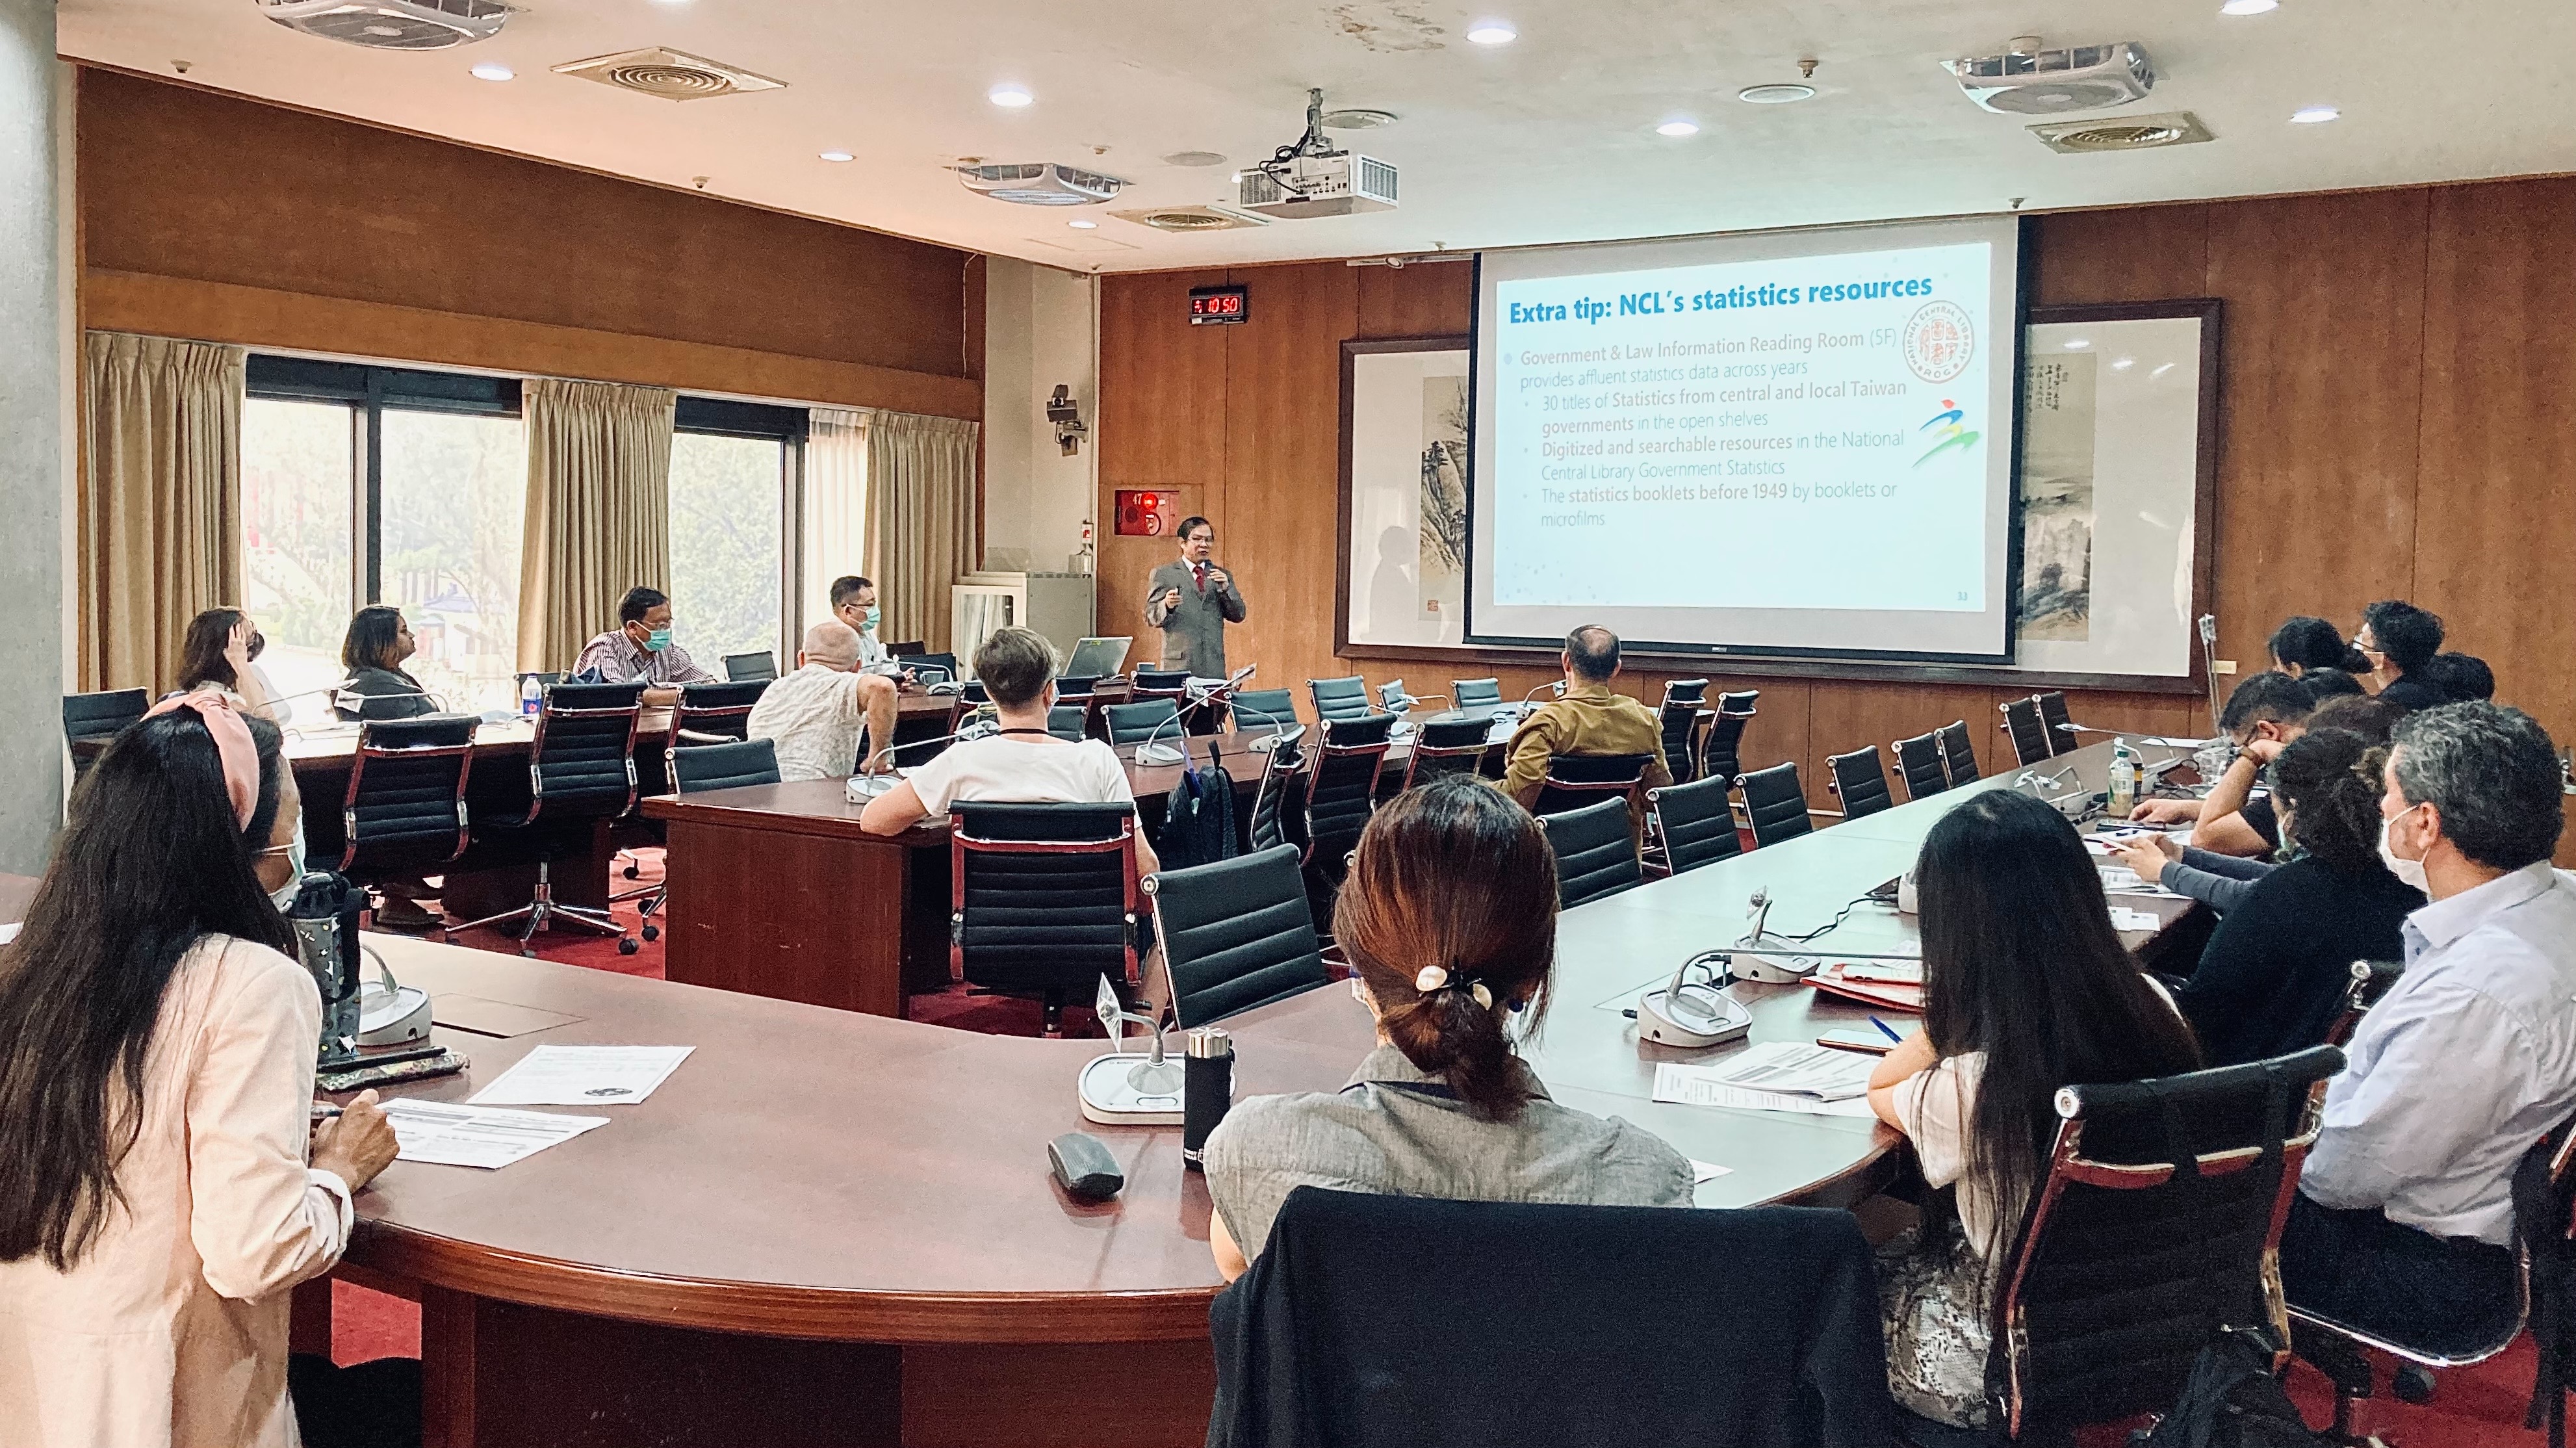 2020 Library Workshop: A Compendious Introduction to Taiwan's Official Statistic